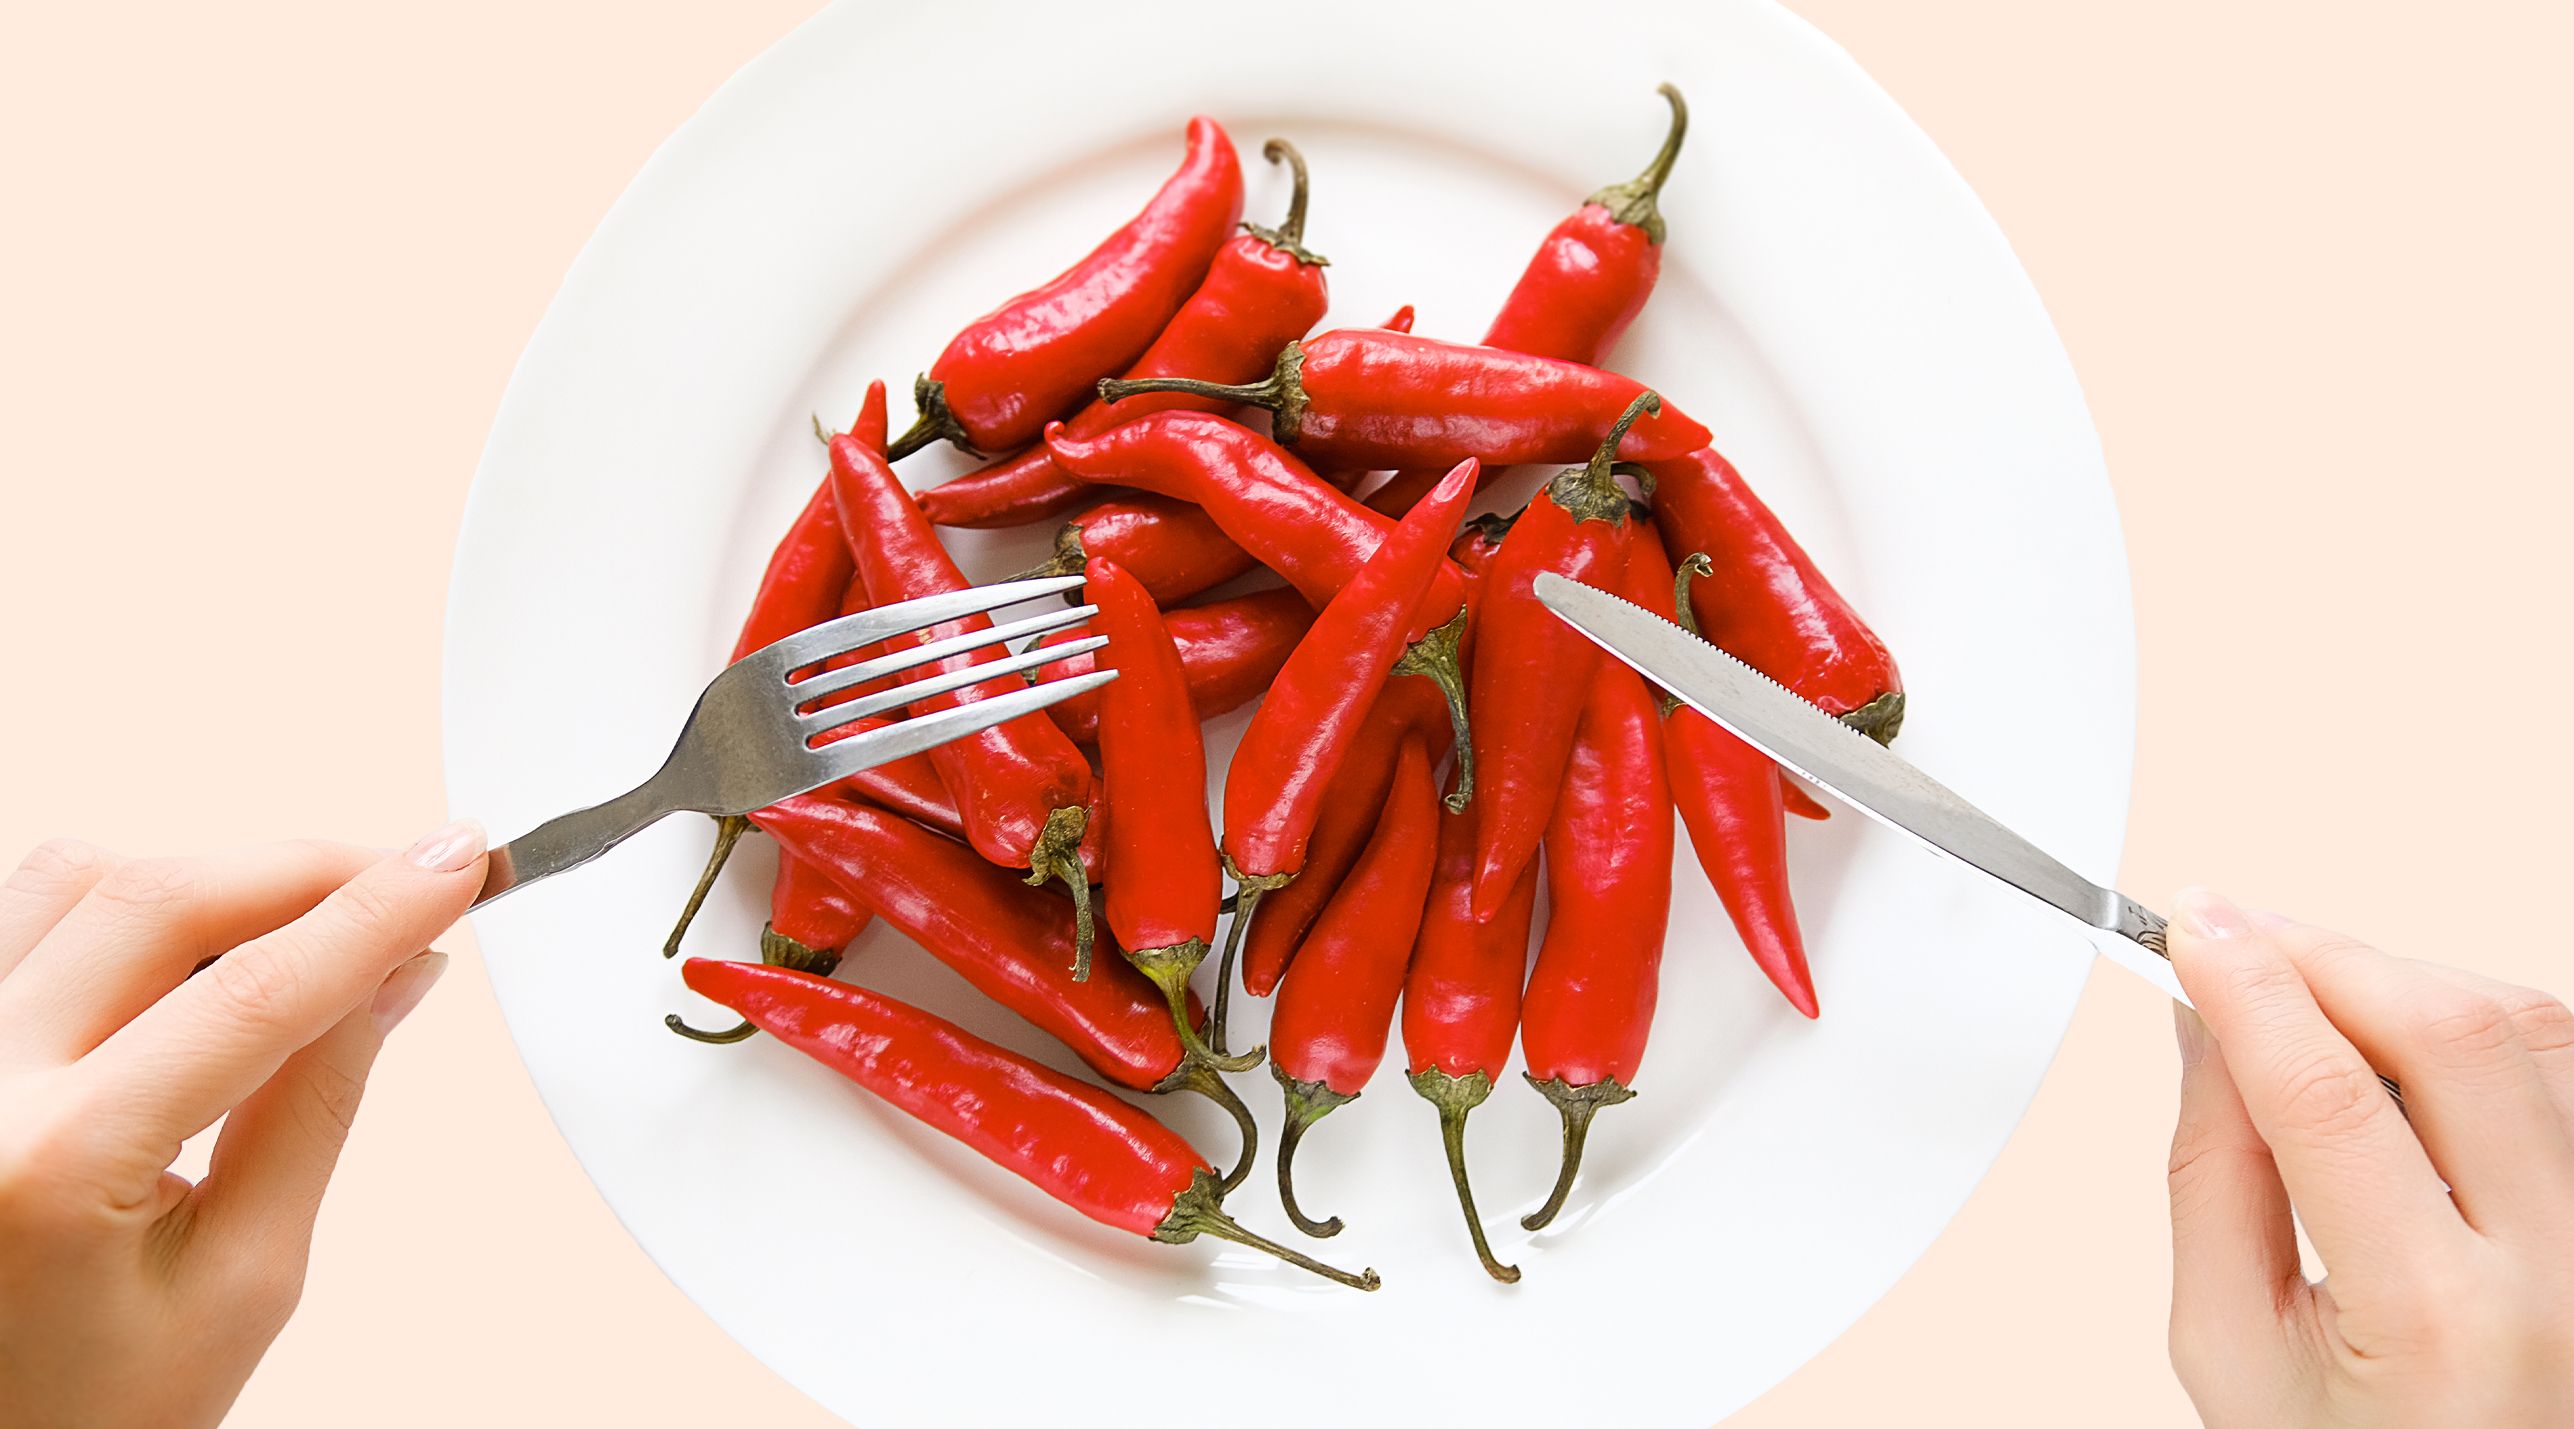 Hot and heavy: Does eating spicy food make you fat?